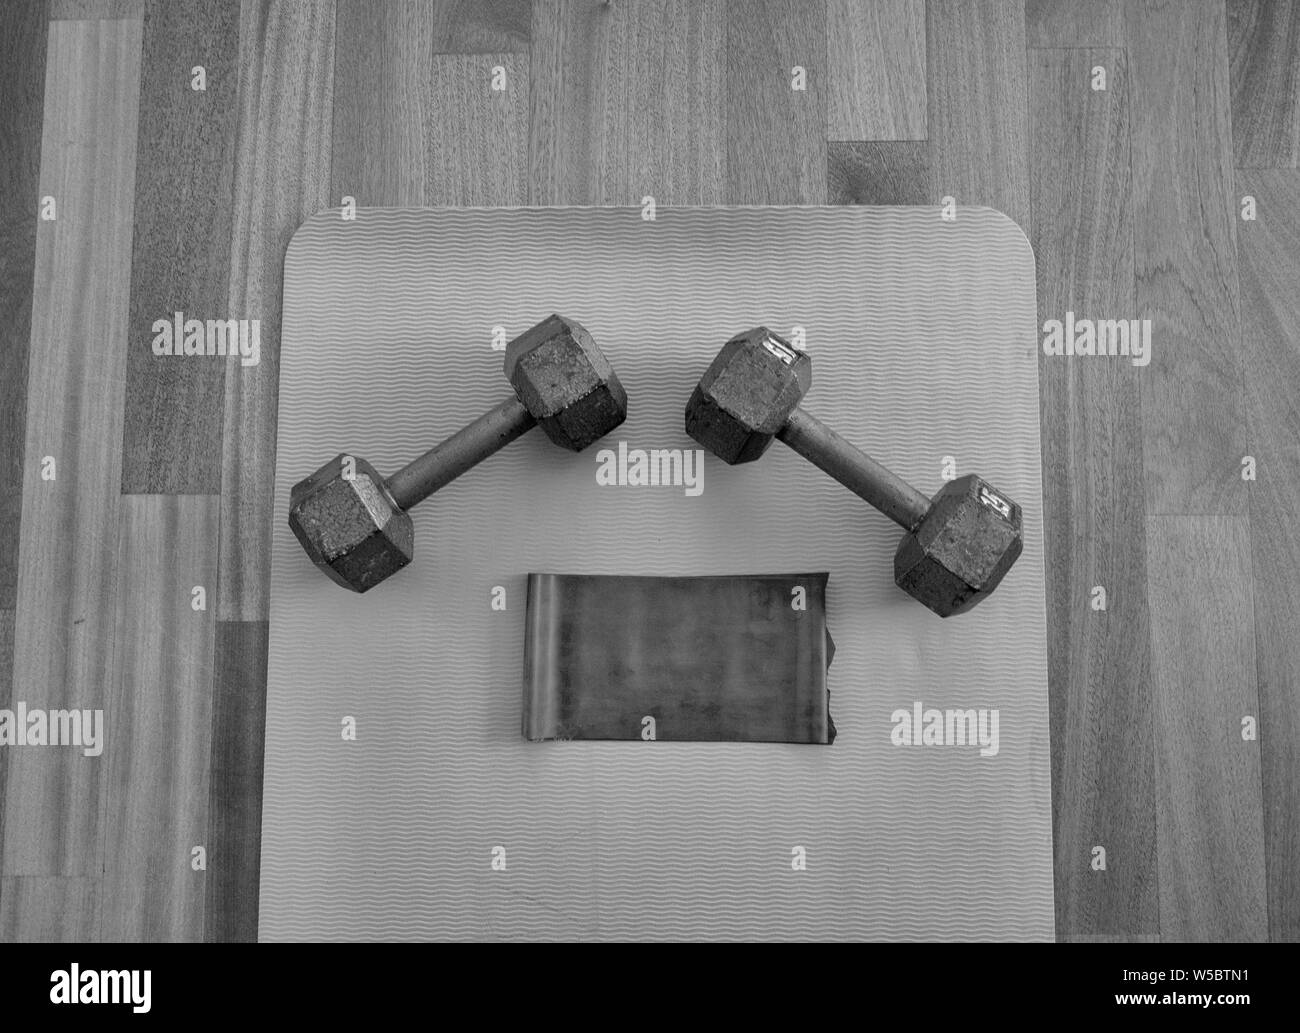 Black and white version of Dumbbells and Exercise band on a Yoga Mat for a Home workout Stock Photo